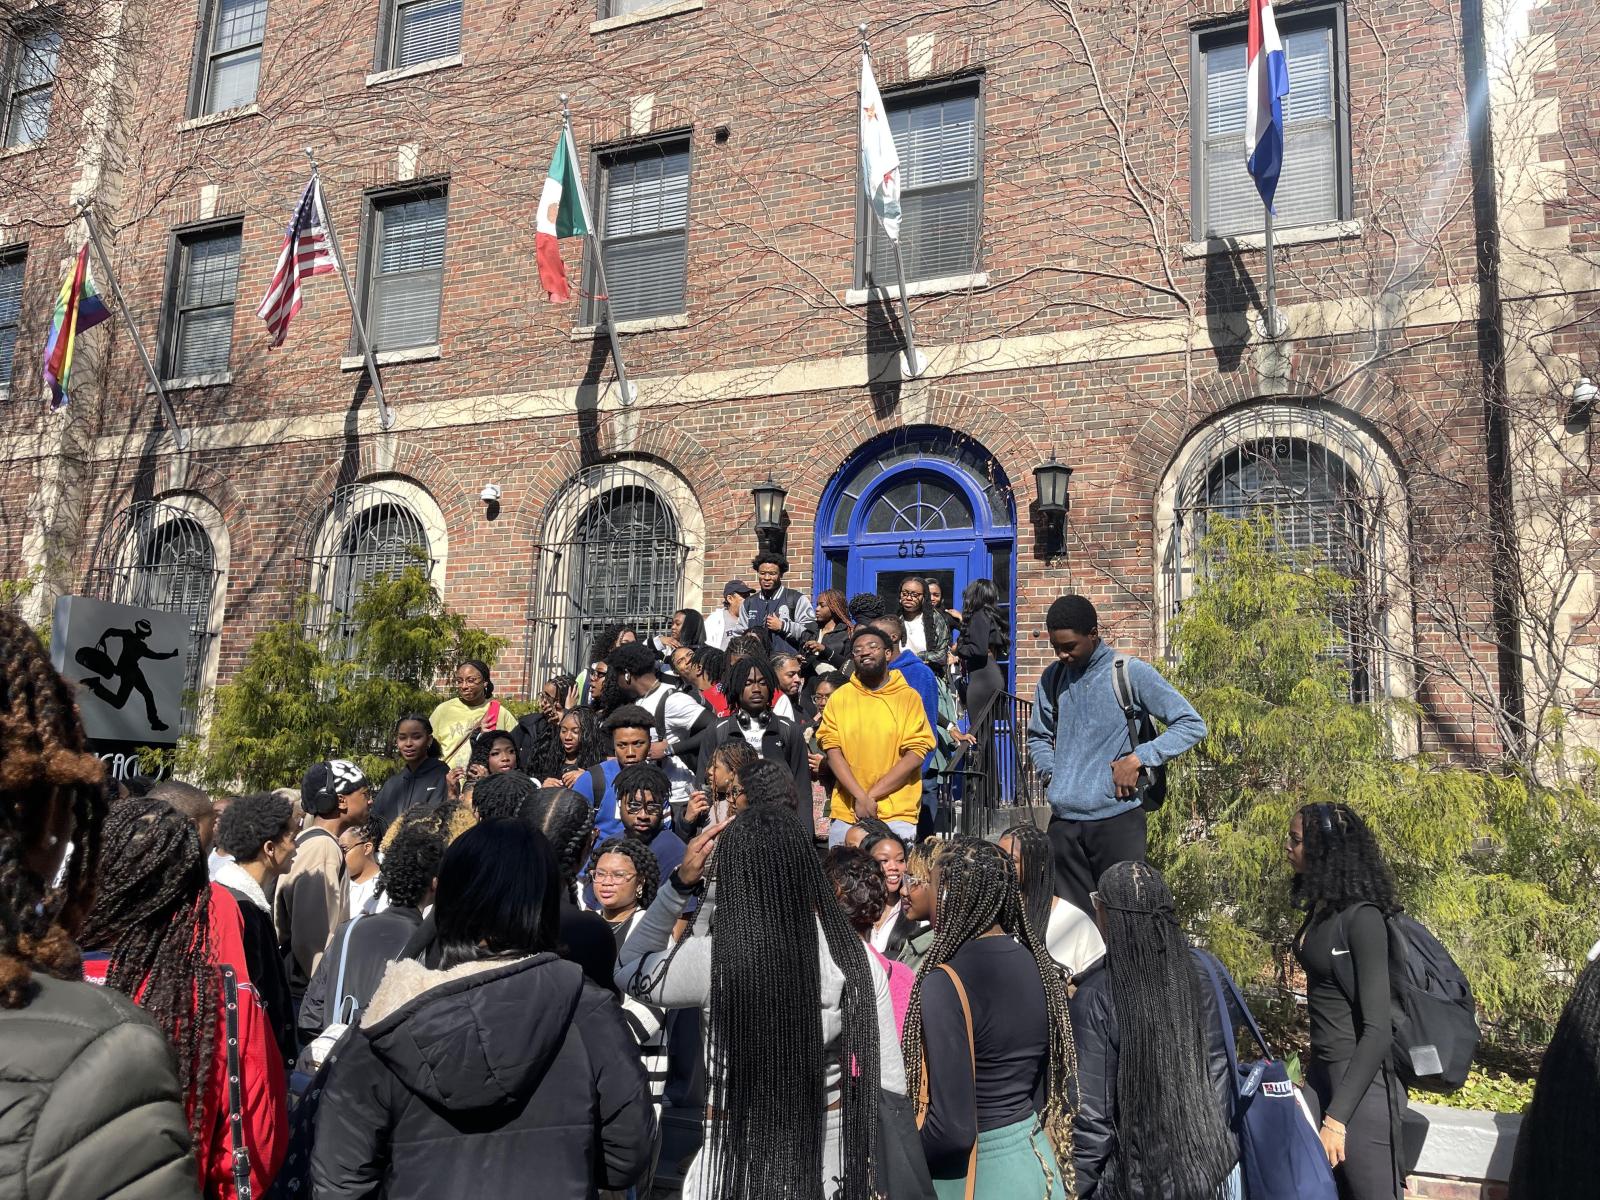 Students convene outside their lodging before a full day of volunteering in the community. Source: Autumn Coleman